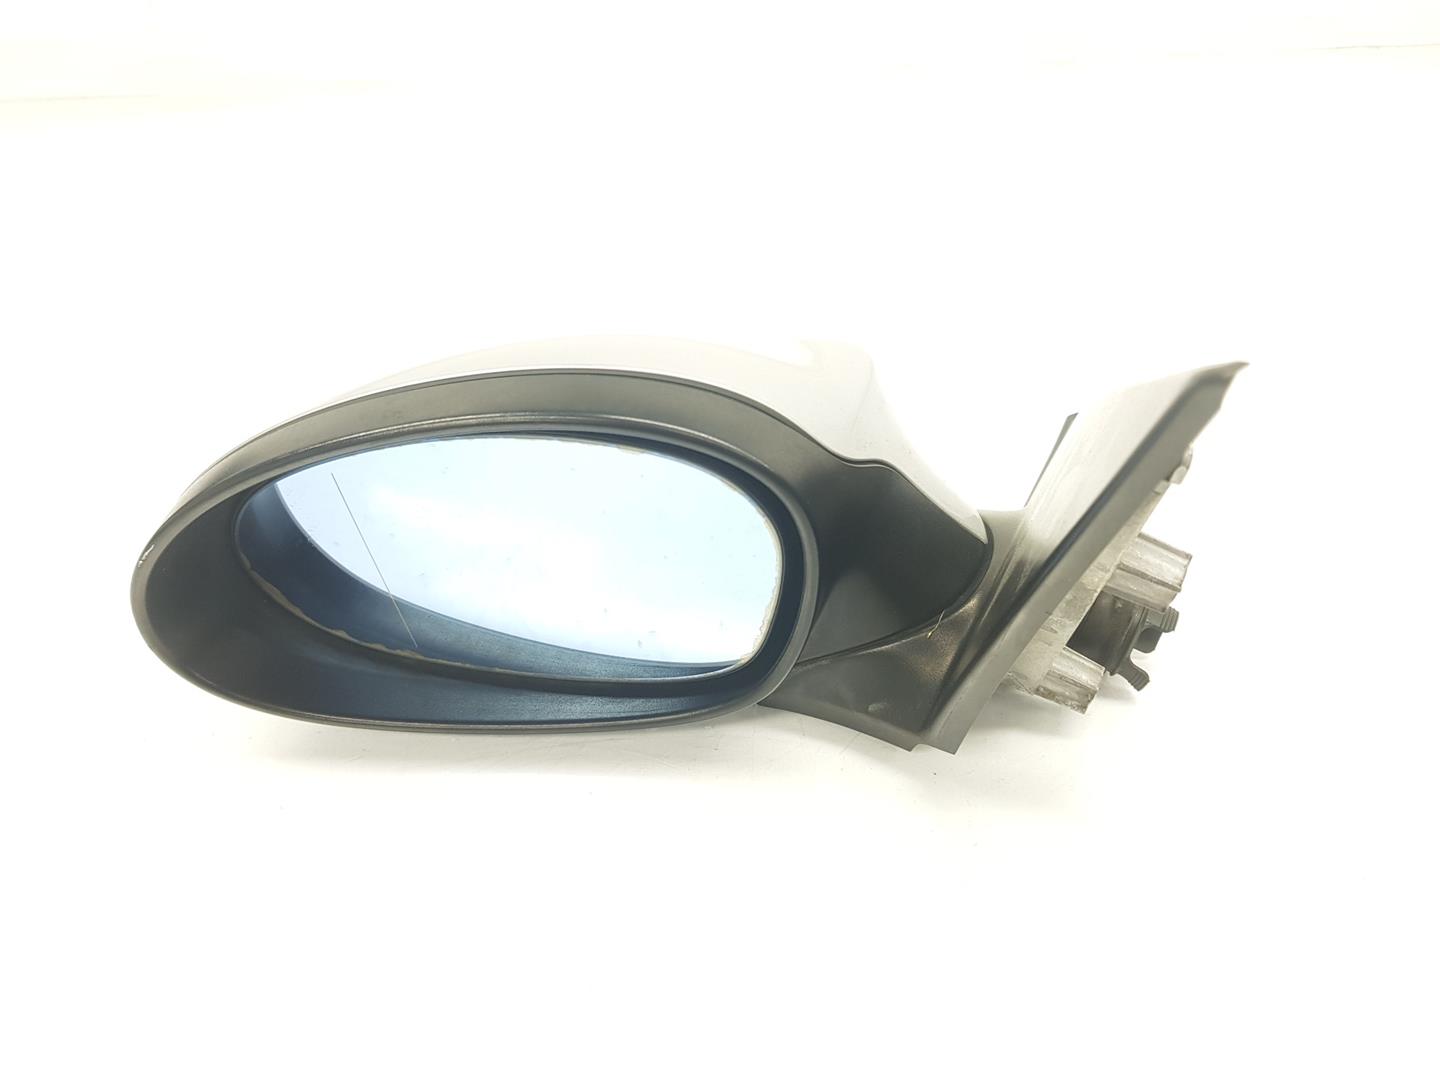 BMW 1 Series F20/F21 (2011-2020) Left Side Wing Mirror 51167189849, 51167189849, GRIS354 24205797